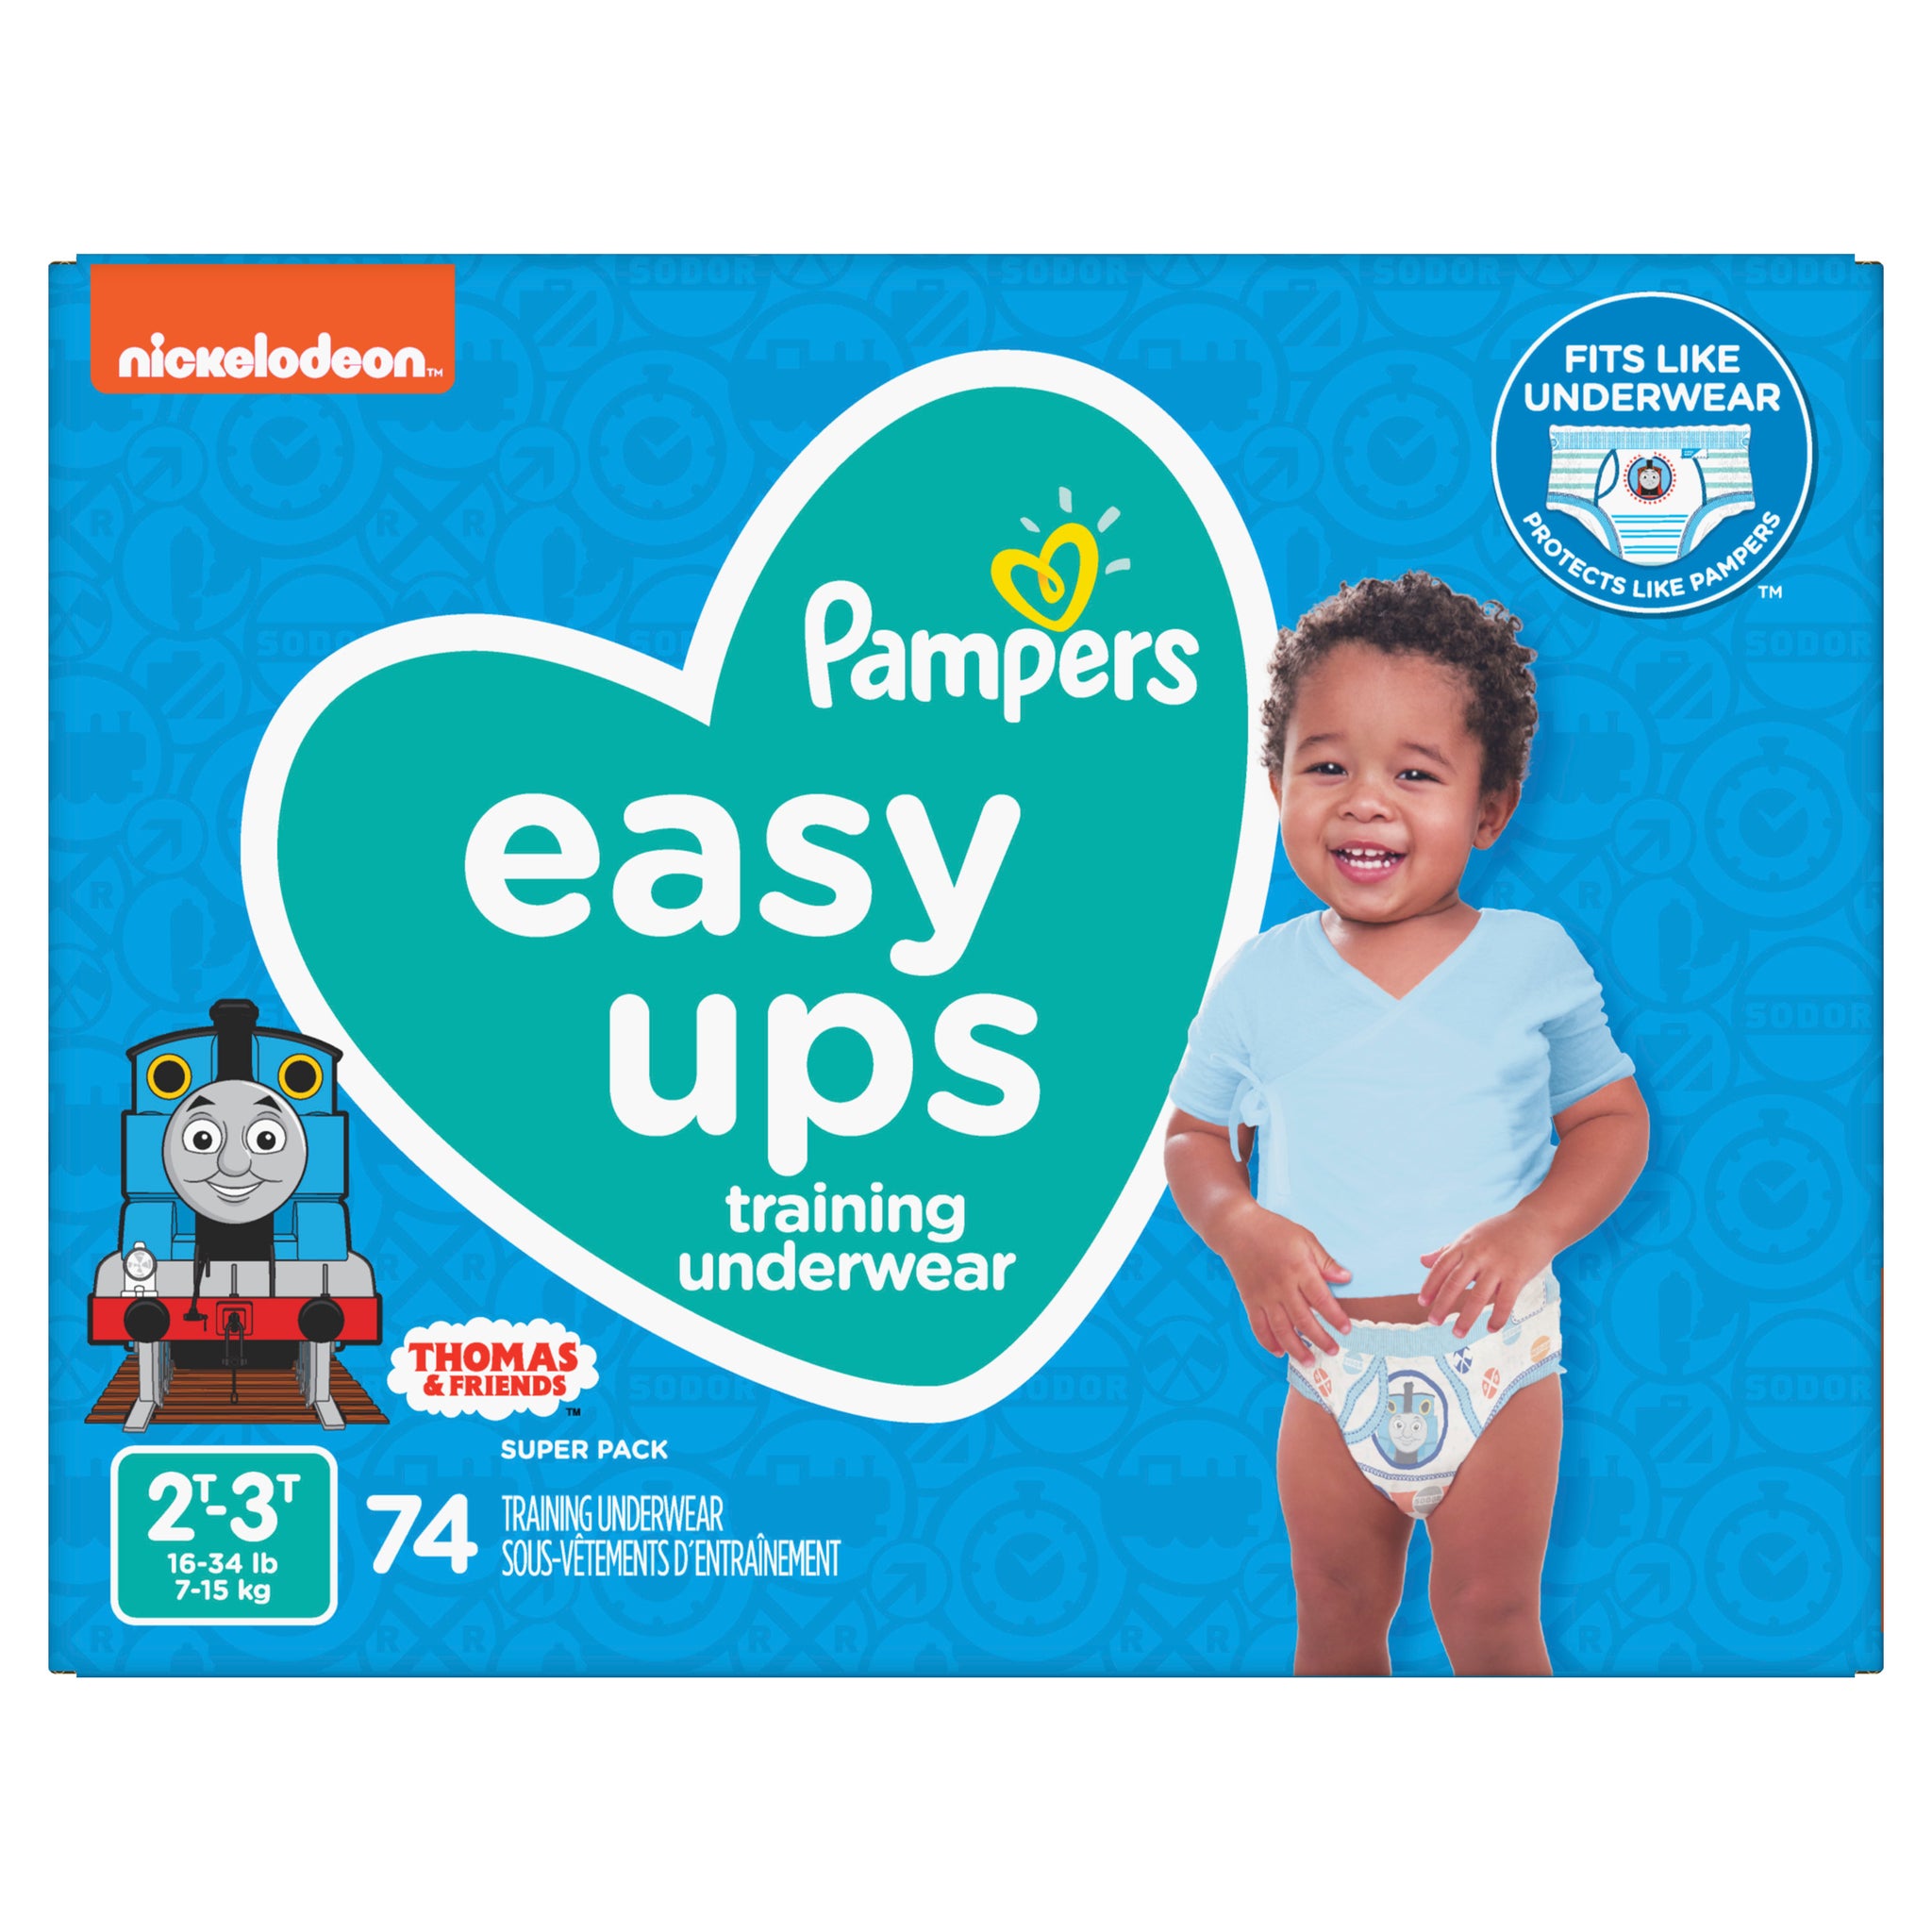 Pull-Ups Learning Designs Boys' Potty Training Pants 2T-3T (16-34 lbs), 74  ct - Foods Co.